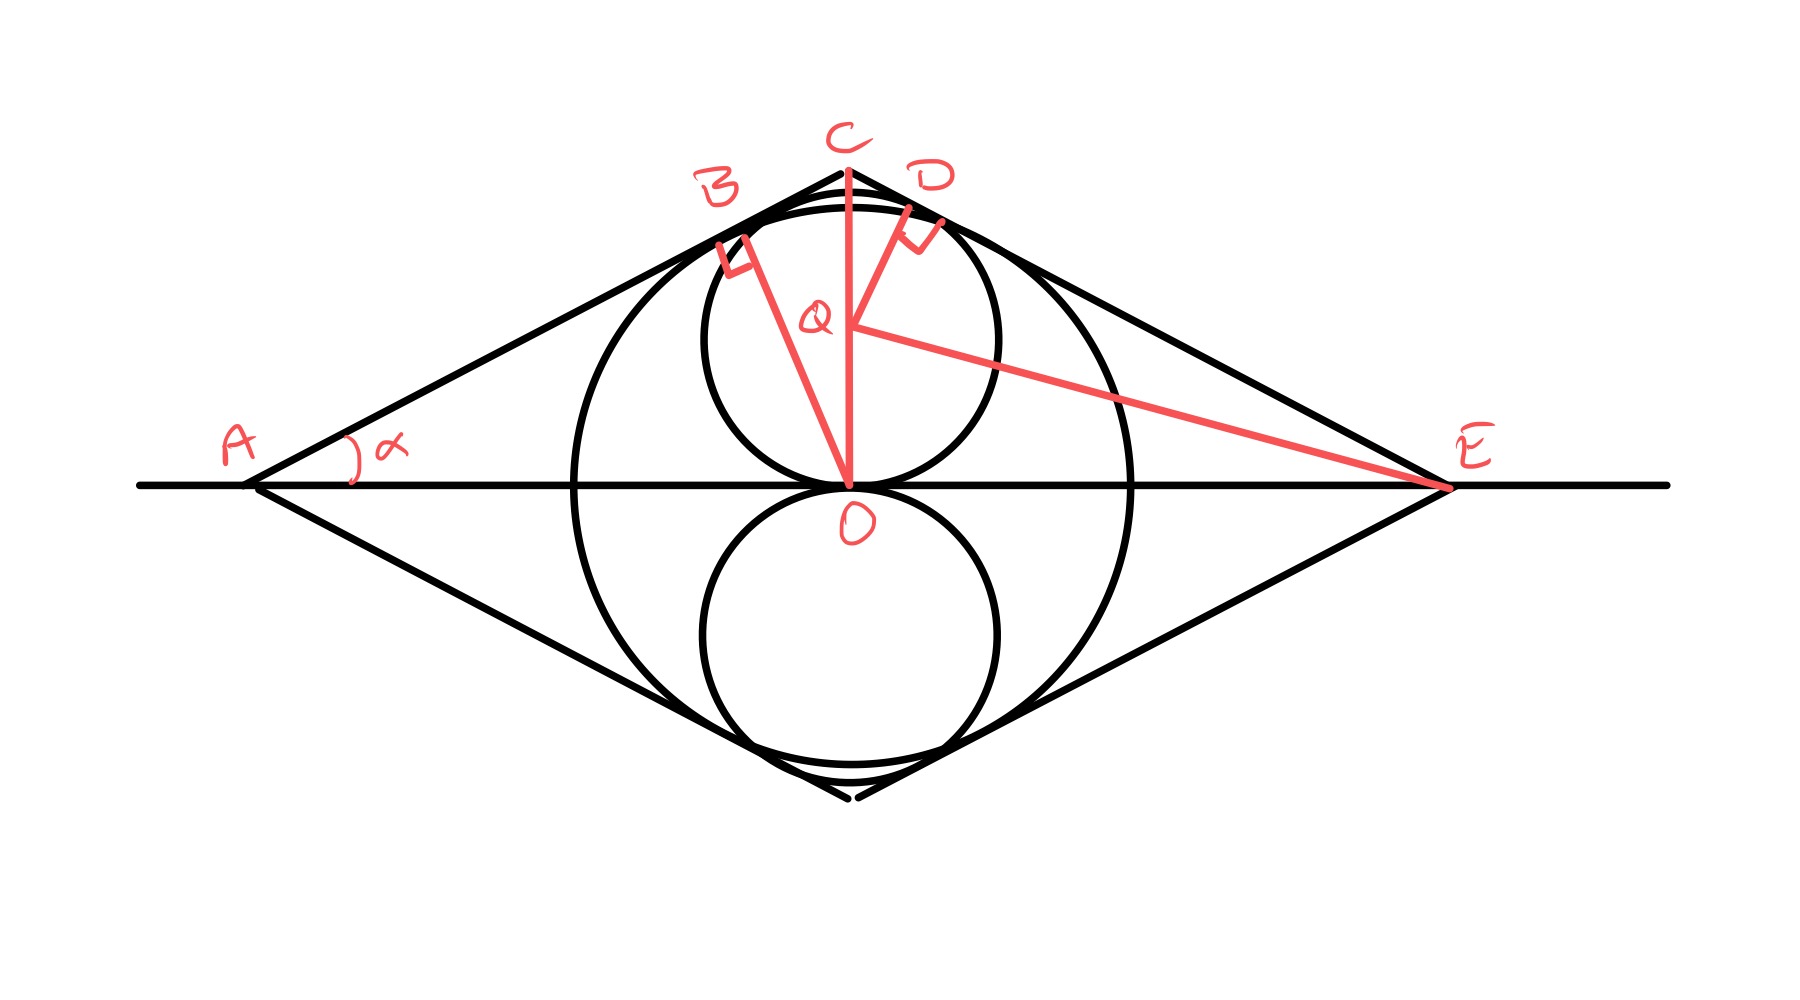 Circles in rhombic sequel labelled